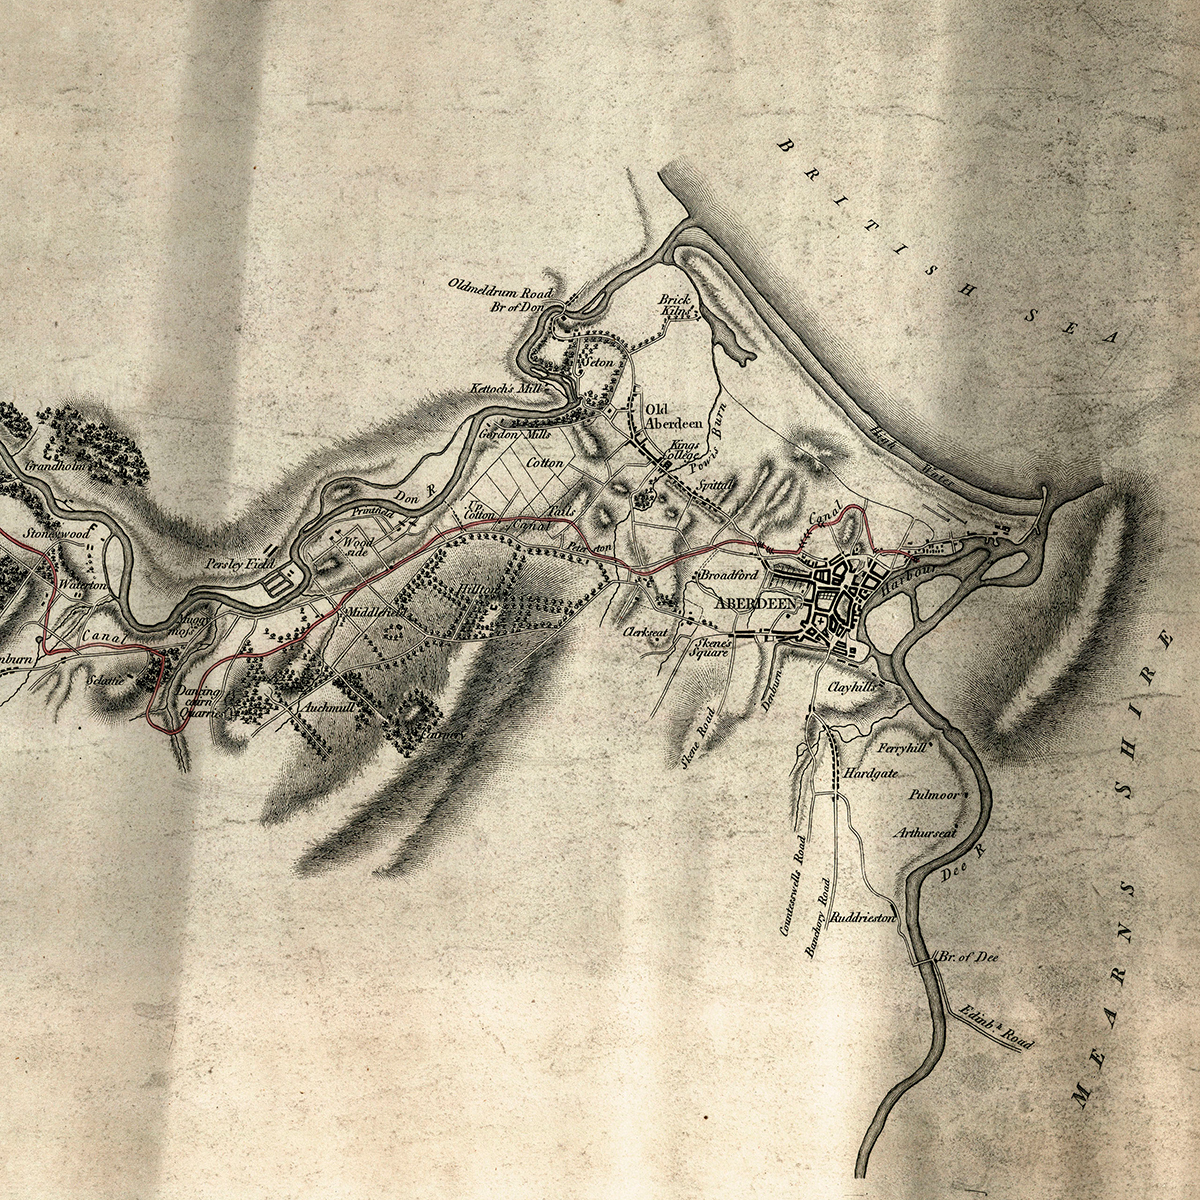 Printed map of Aberdeen and Old Aberdeen in 1796, with the river Don to the North and the Dee to the South, surrounding farmland and terrain features such as hills. The route of a proposed canal from Inverurie is shown passing North of Aberdeen into the harbour.